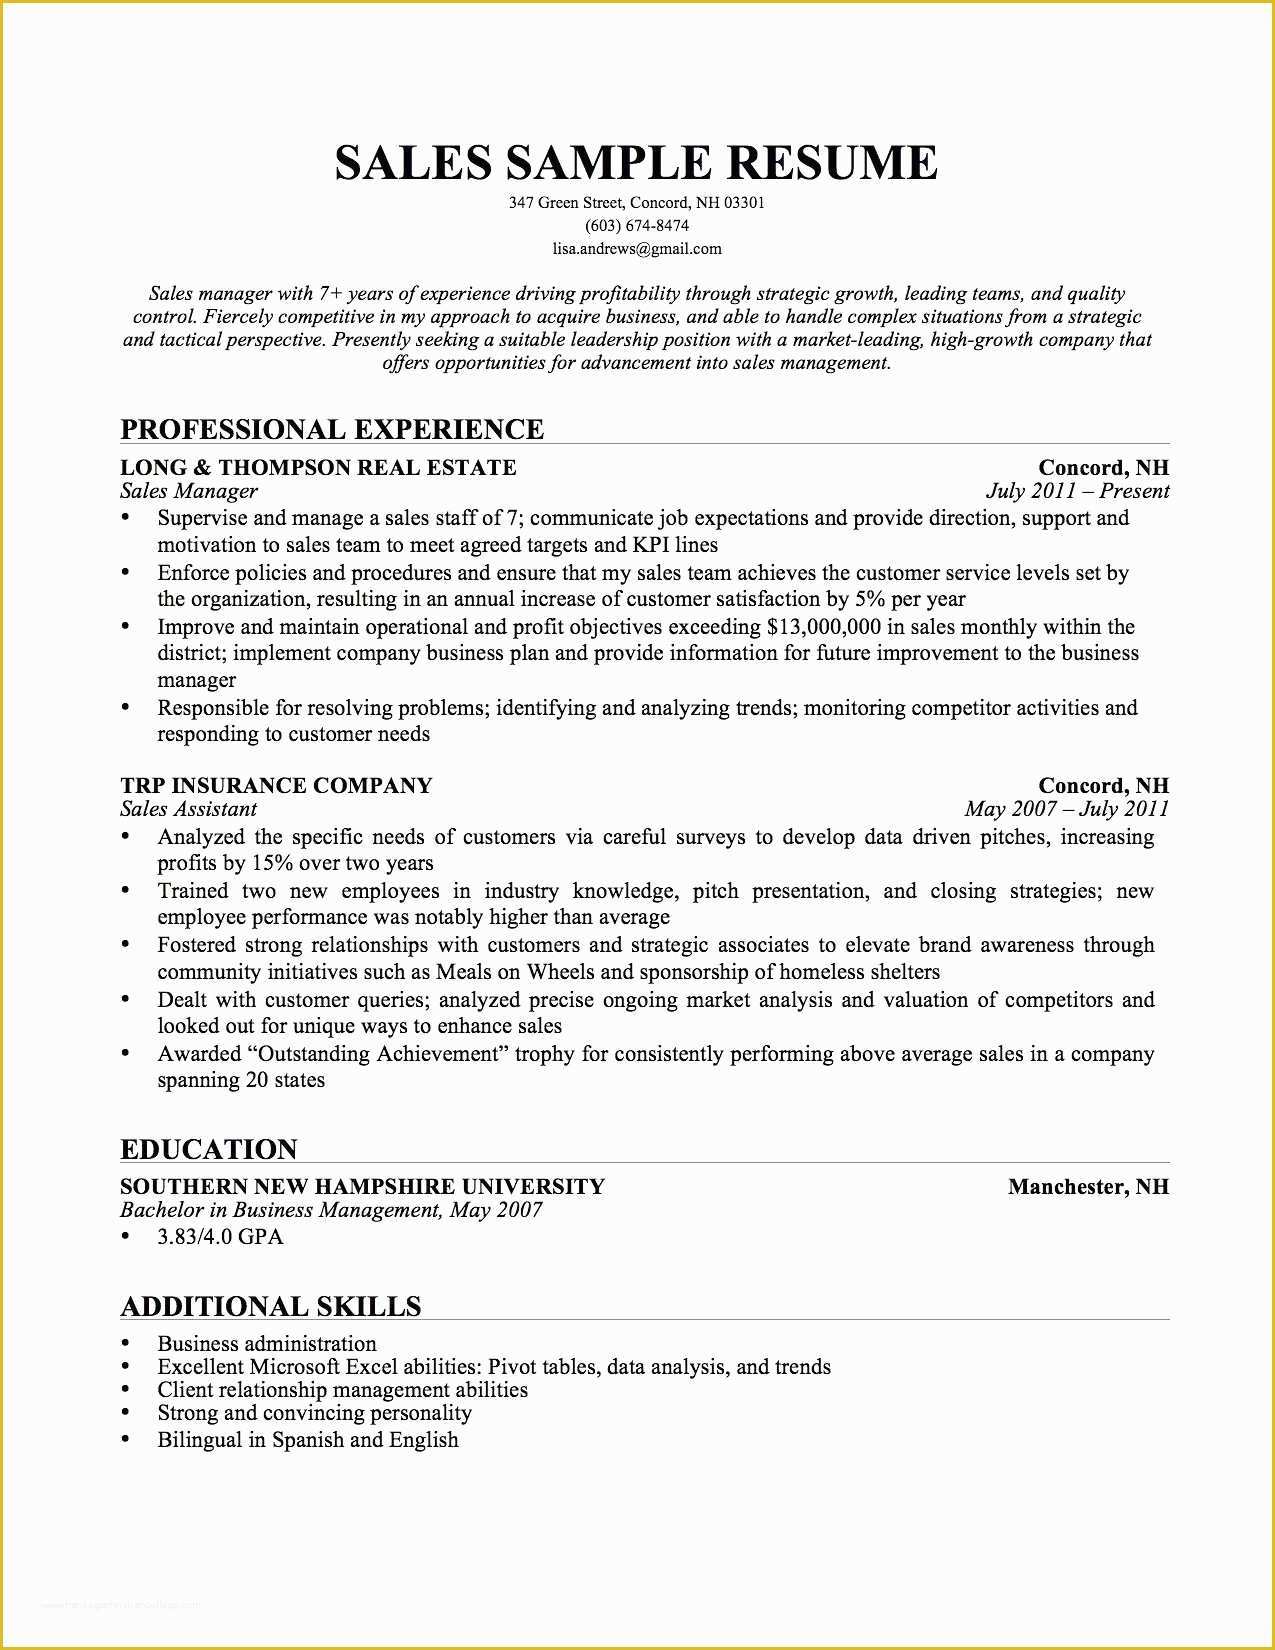 Free Resume Templates for Mac Of Free Resume Maker Download software for Mac Tag Awesome